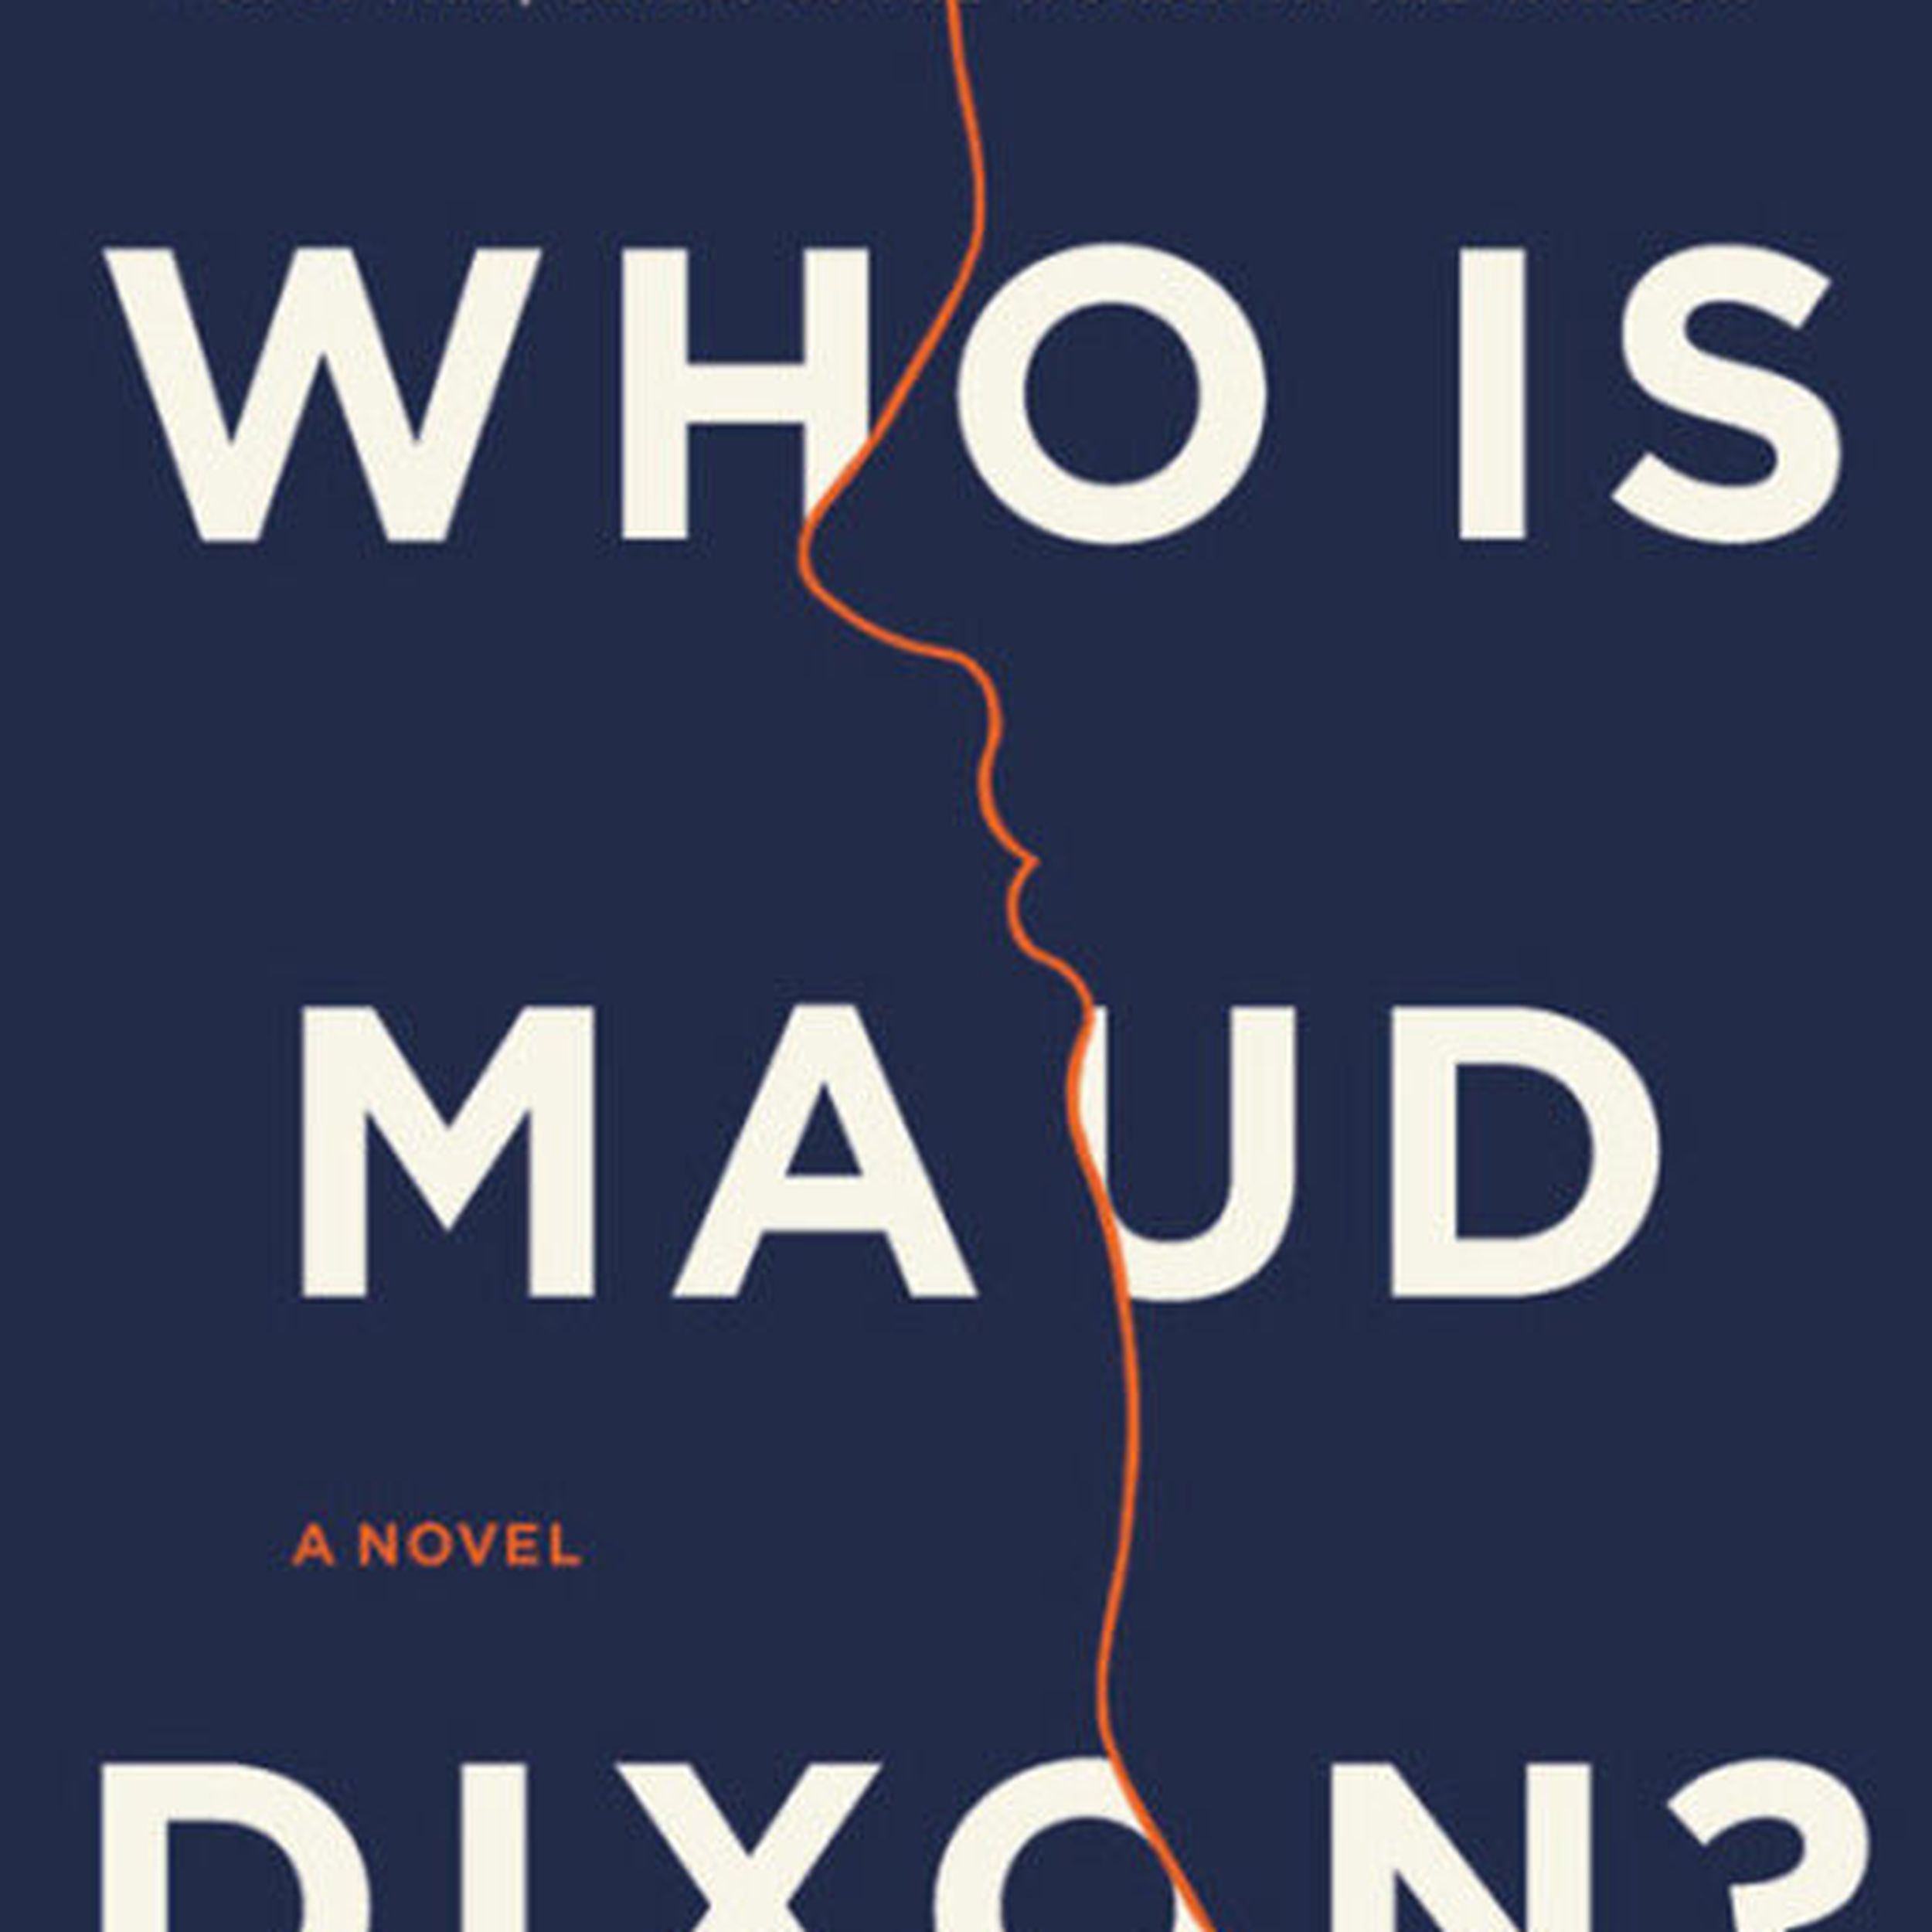 Who Is Maud Dixon?' is a clever debut novel about a debut novel